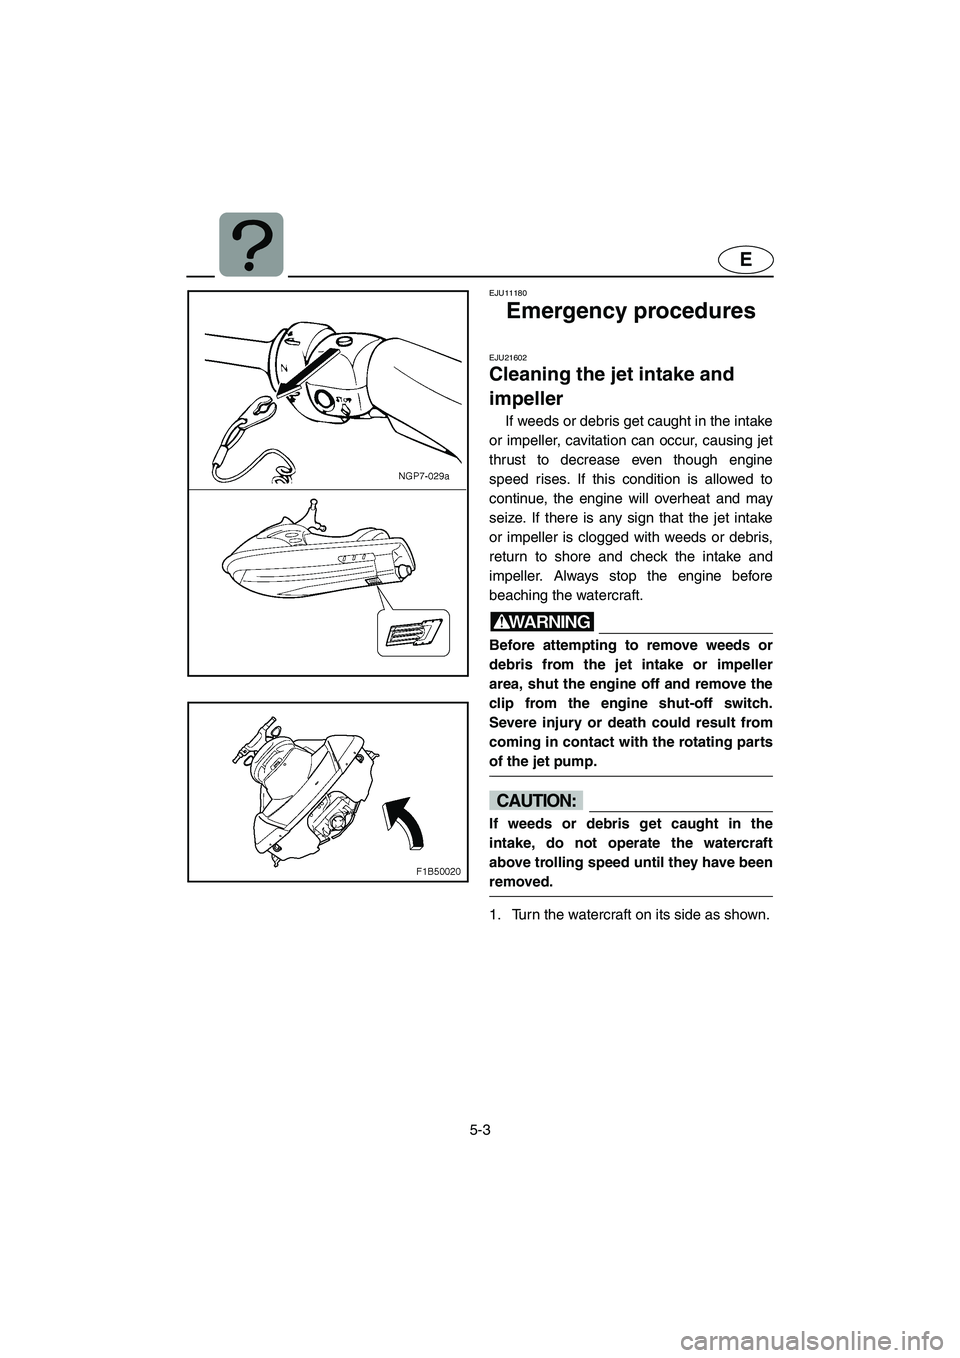 YAMAHA FX HO CRUISER 2006 Owners Guide 5-3
E
EJU11180 
Emergency procedures  
EJU21602 
Cleaning the jet intake and 
impeller 
If weeds or debris get caught in the intake
or impeller, cavitation can occur, causing jet
thrust to decrease ev